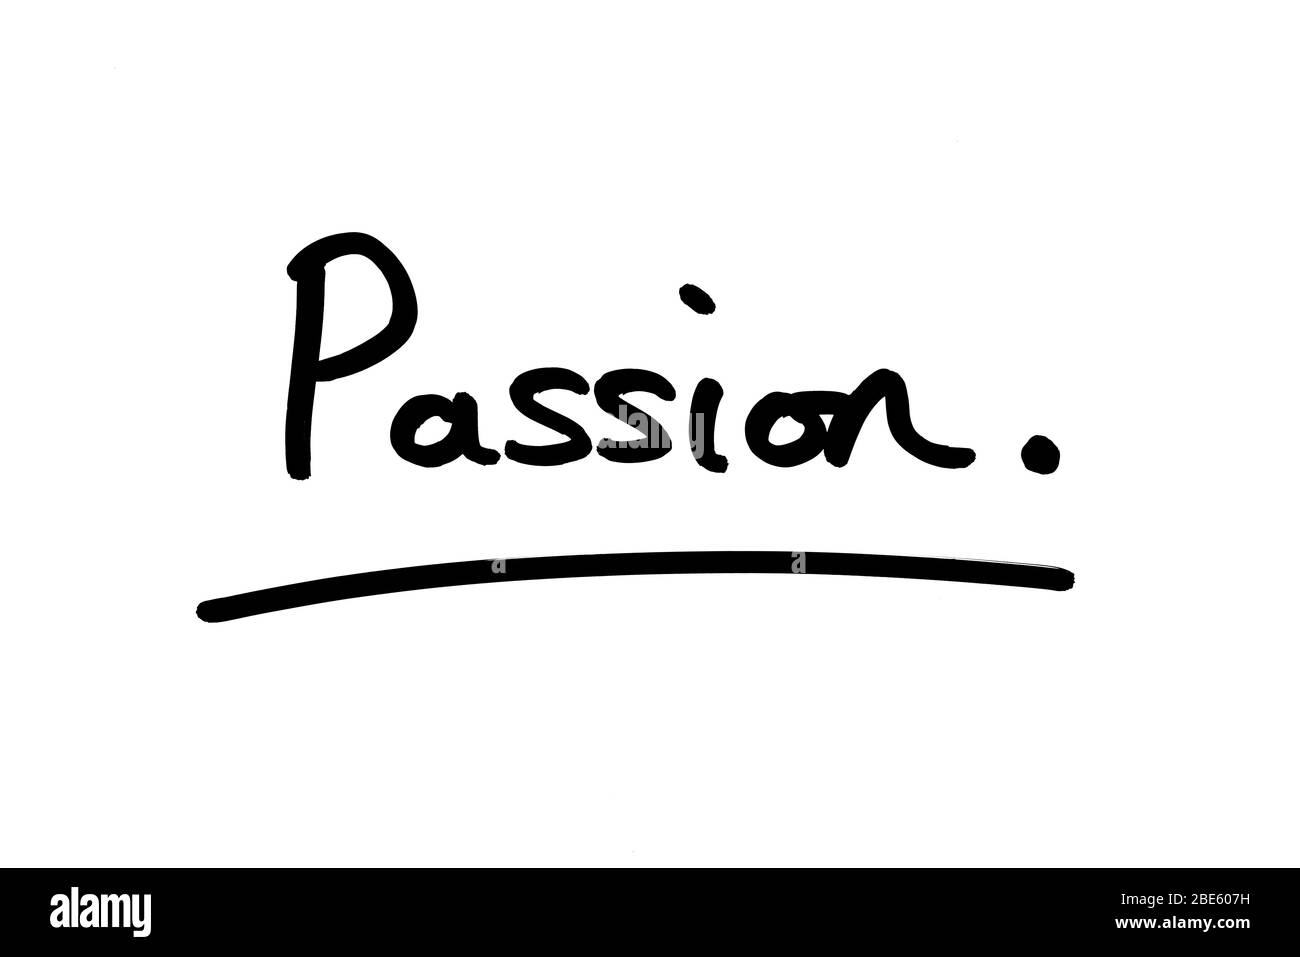 The word Passion handwritten on a white background. Stock Photo